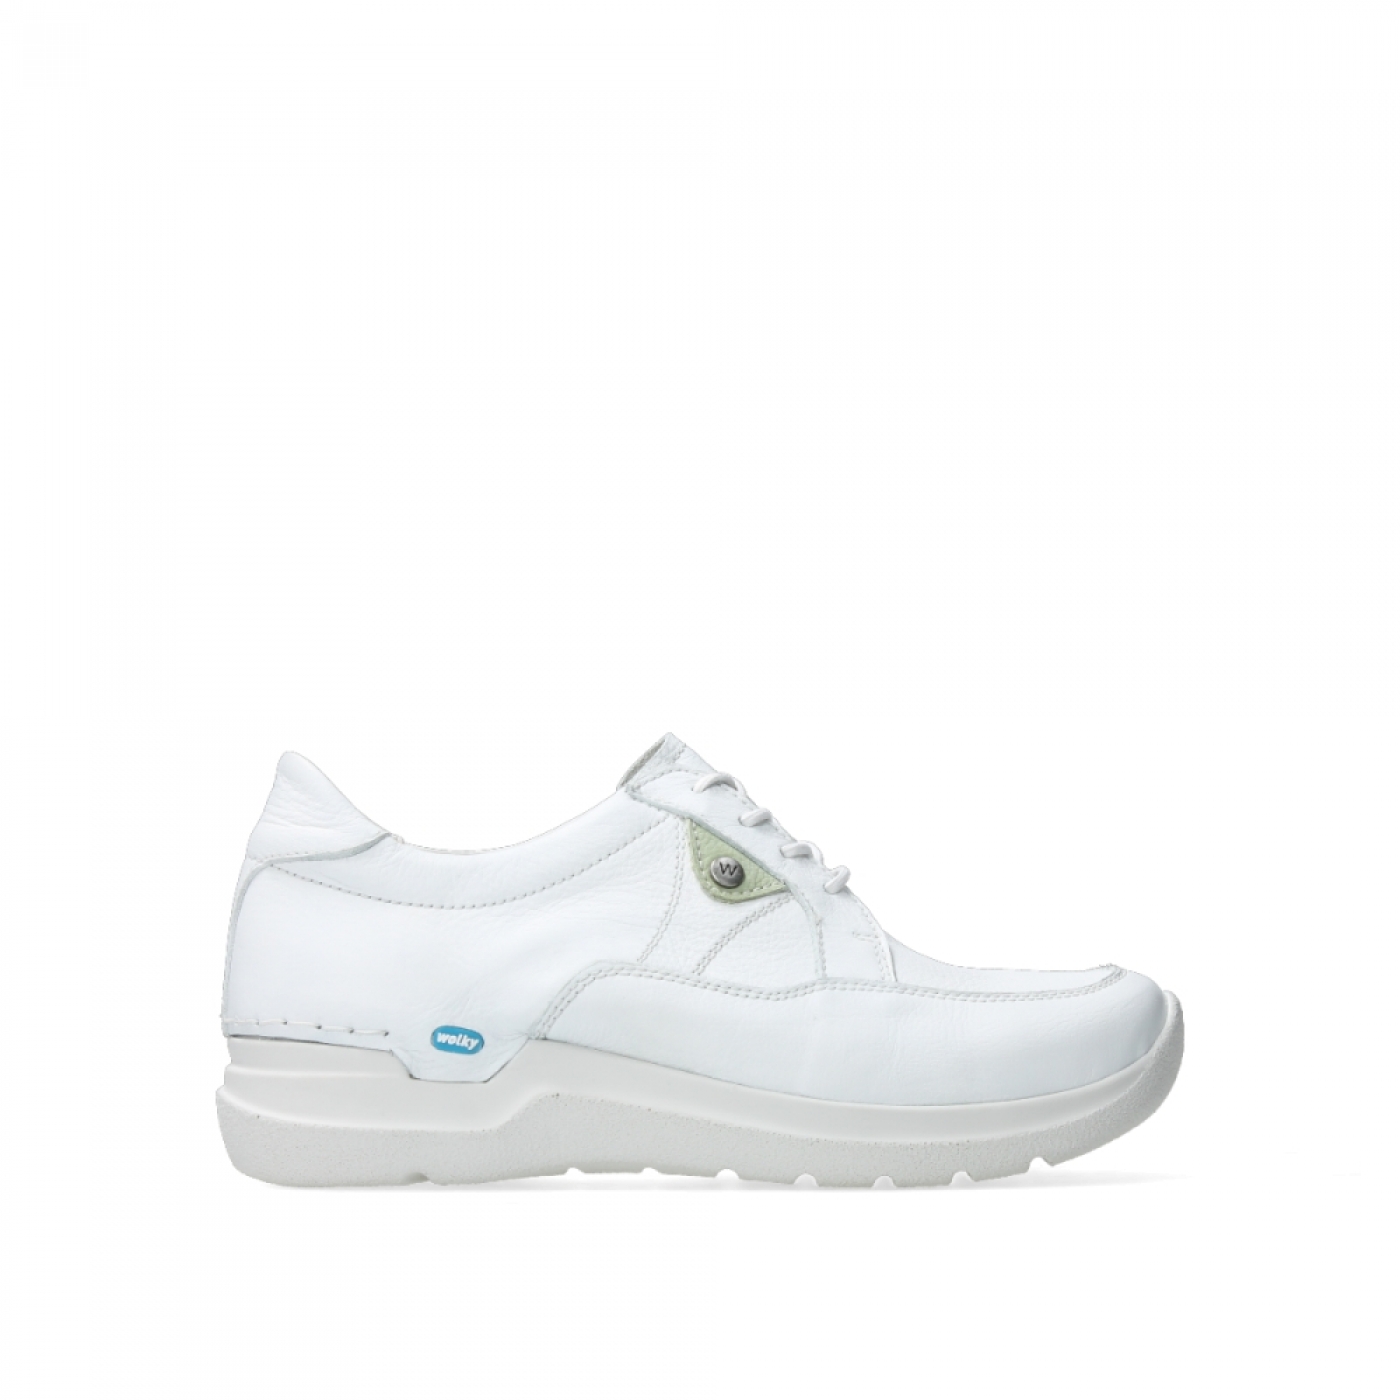 Wolky Shoes Drummer white/light green leather order now! Collection| Wolkyshop.com